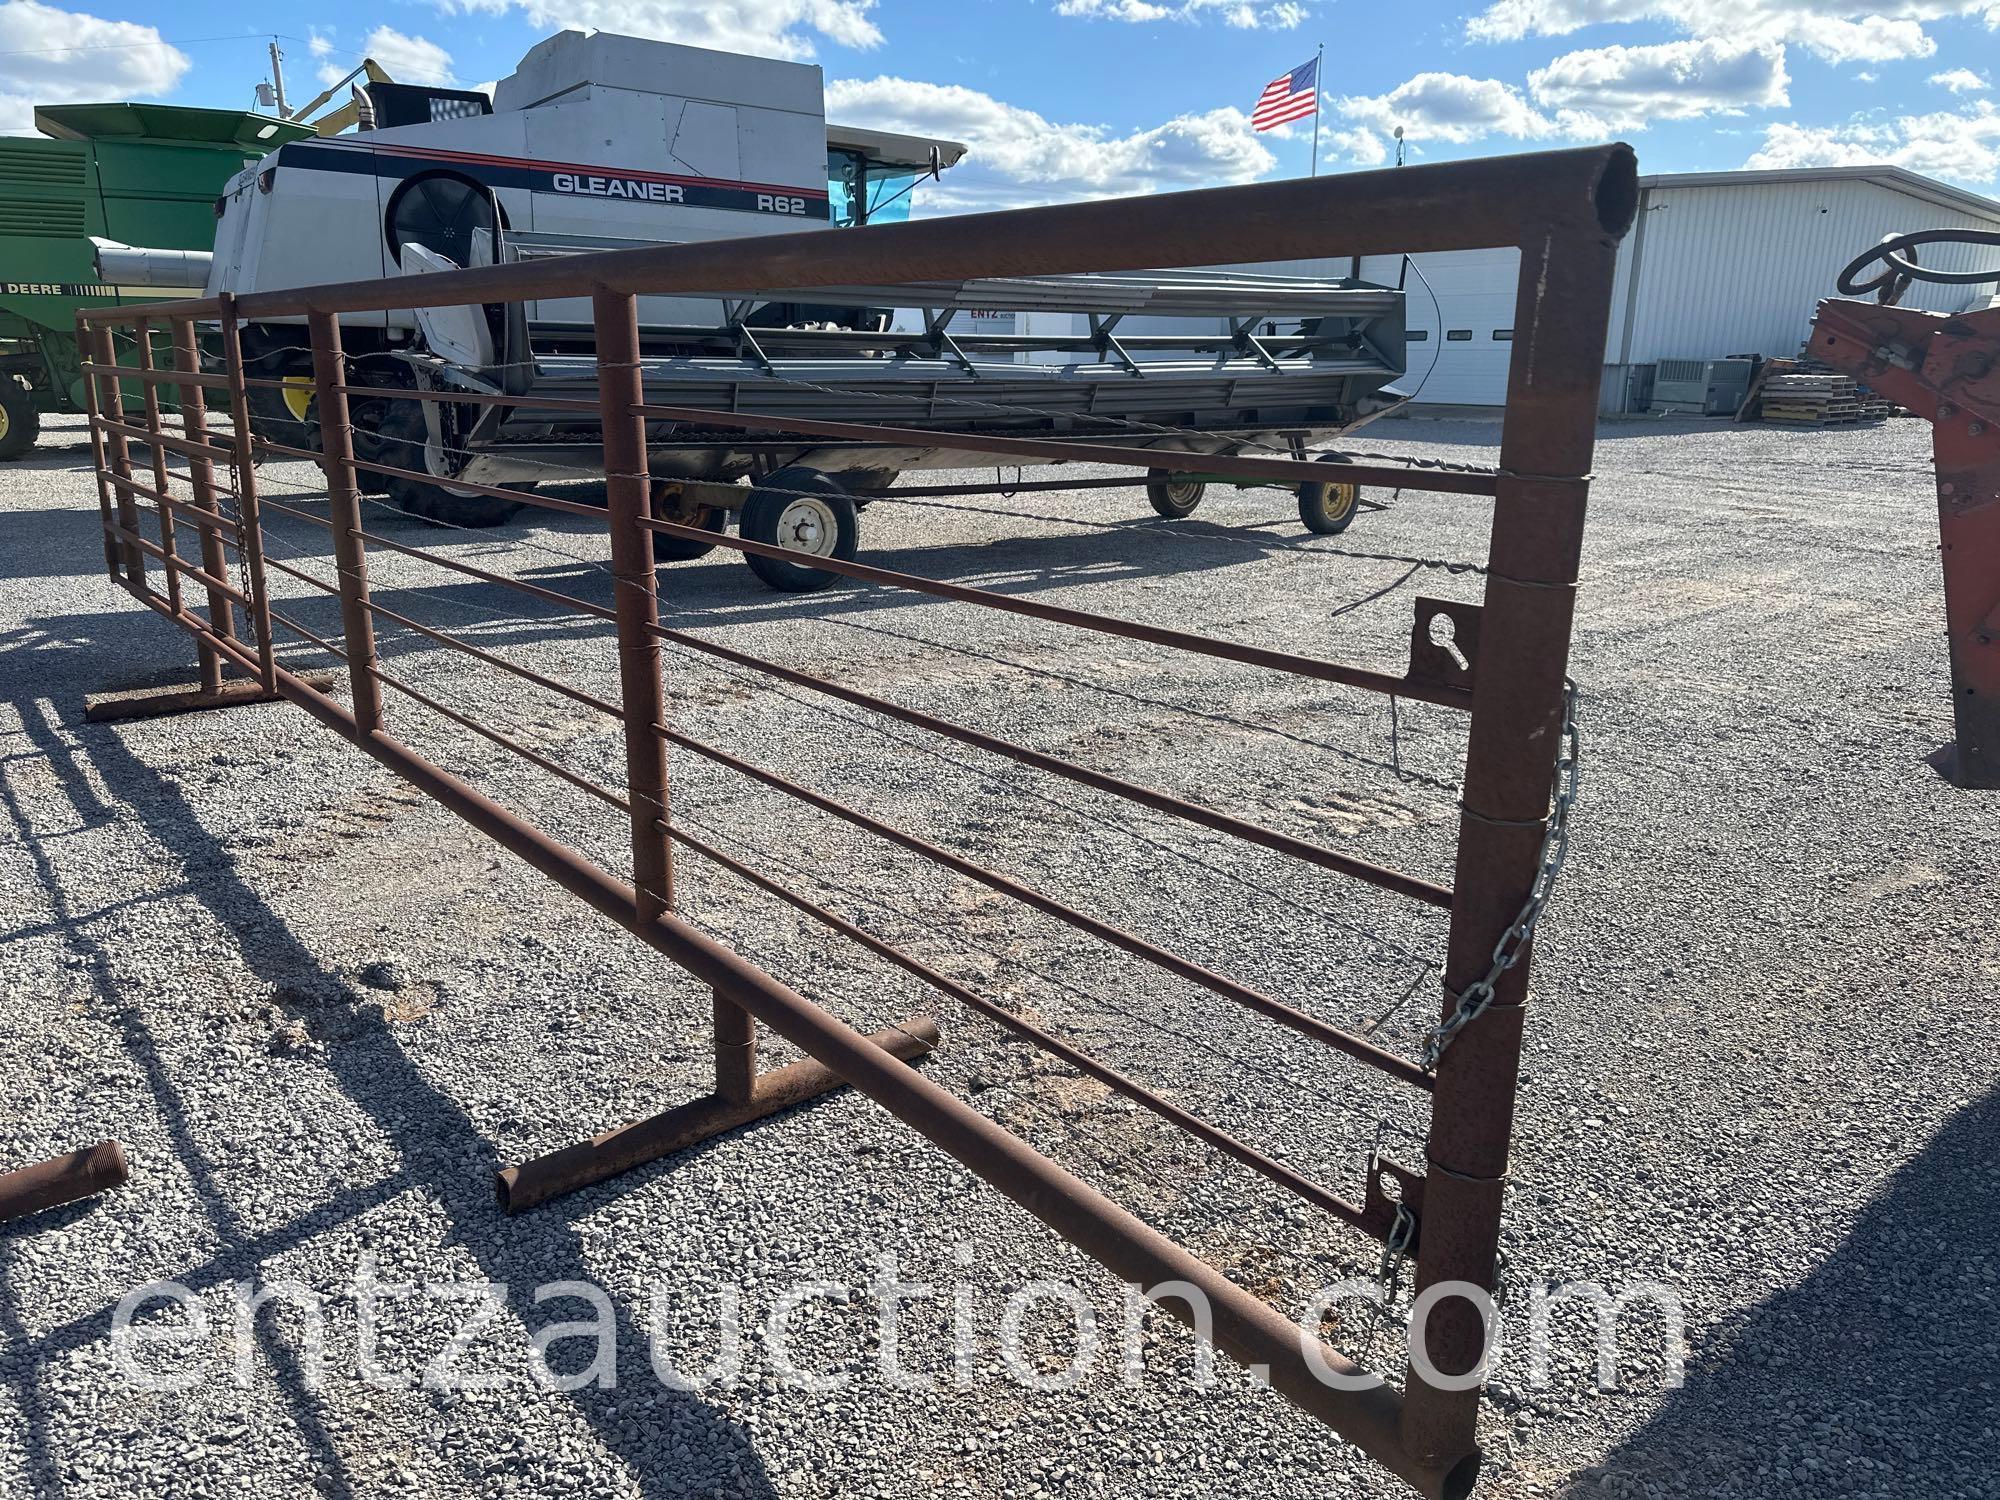 FREESTANDING CATTLE PANEL, 24' X 52", 2 7/8" PIPE,